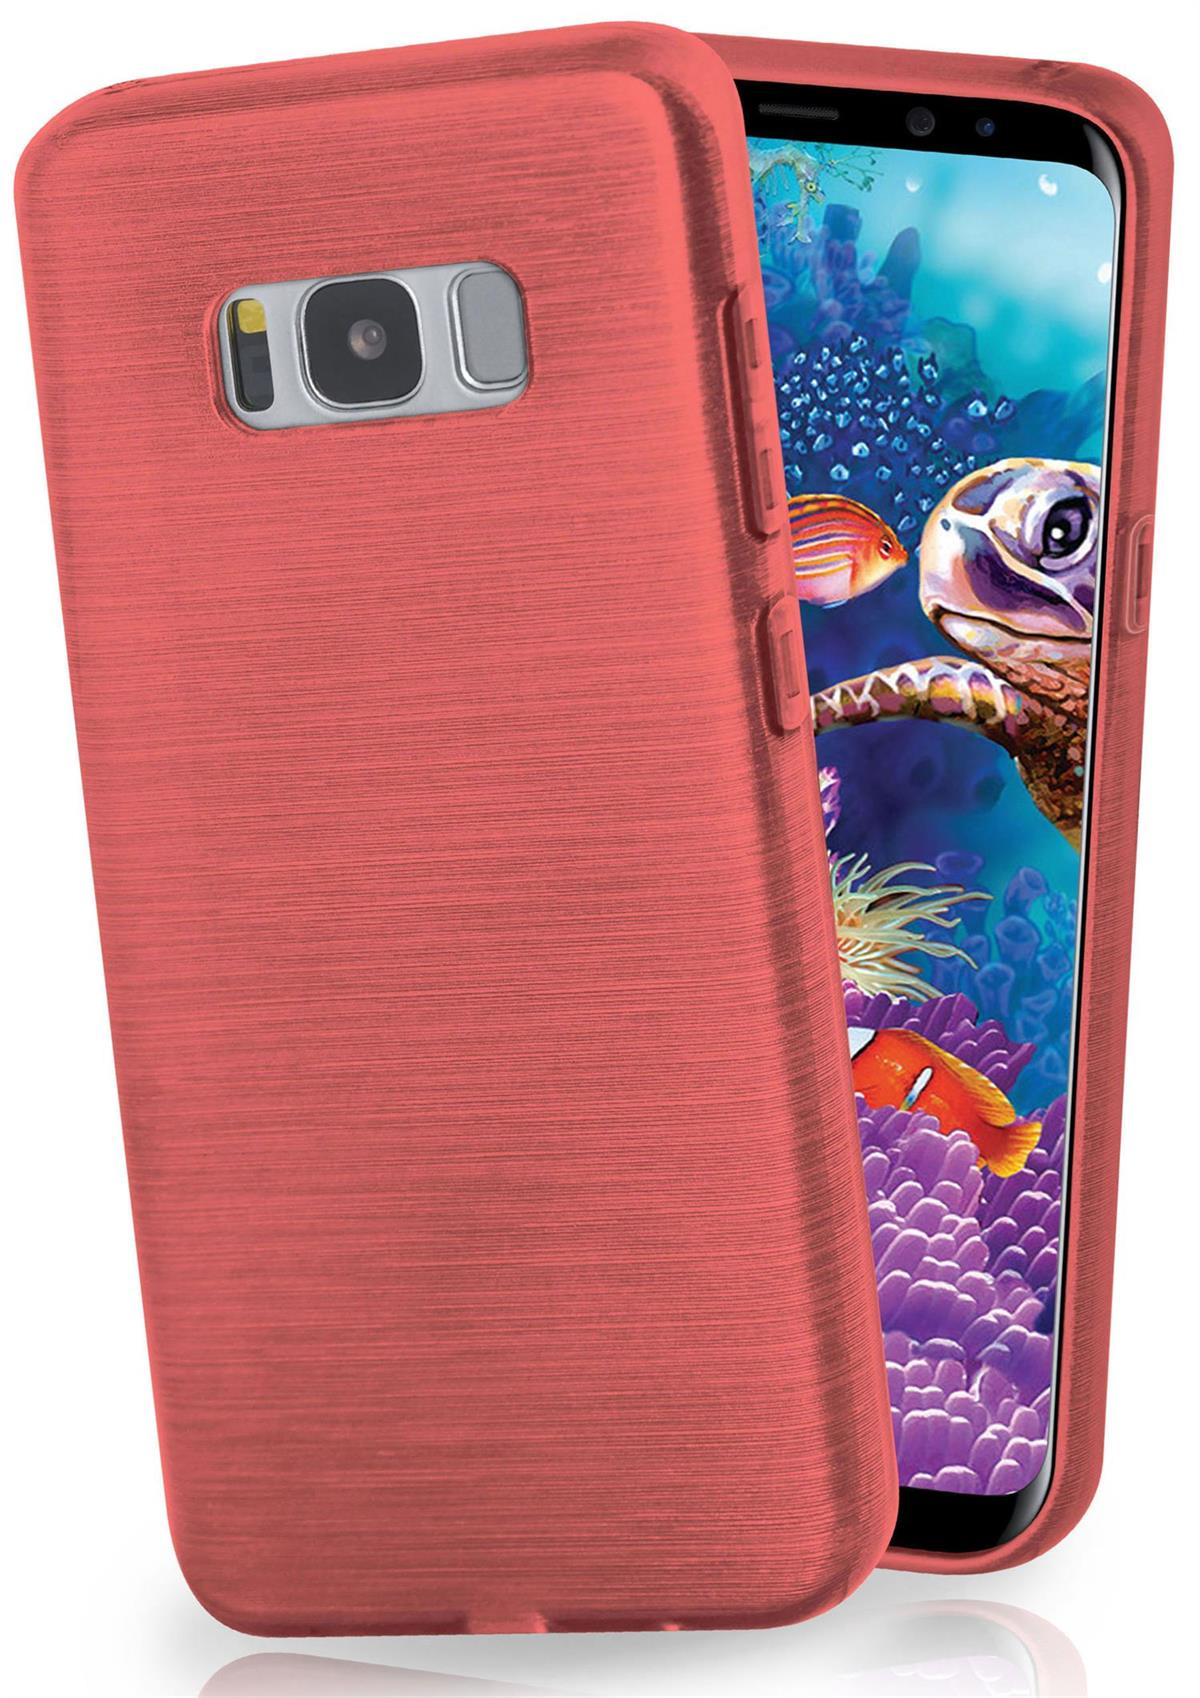 MOEX Case, S8, Brushed Backcover, Galaxy Samsung, Coral-Red